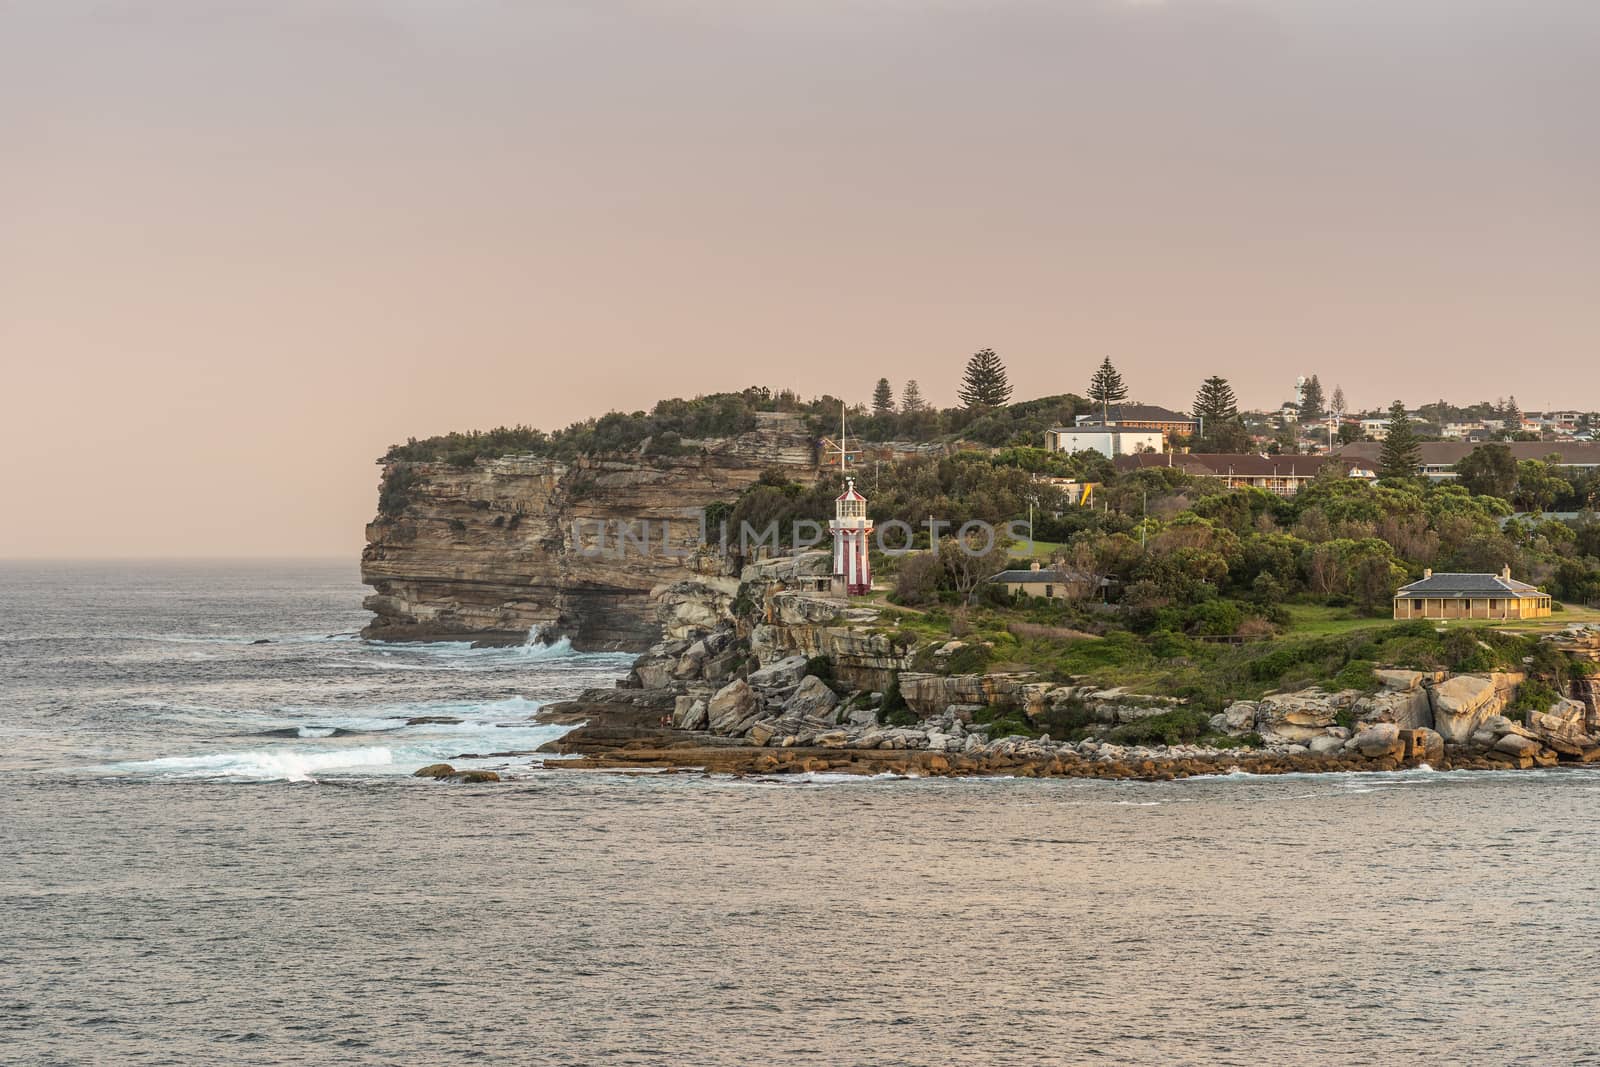 Sydney, Australia - February 12, 2019: South Head cliffs at gate between Tasman Sea and Sydney Bay during sunset. Cloudless pale sky. Gray water. Crashing waves. Warm brown rocks and Hornby lighthouse